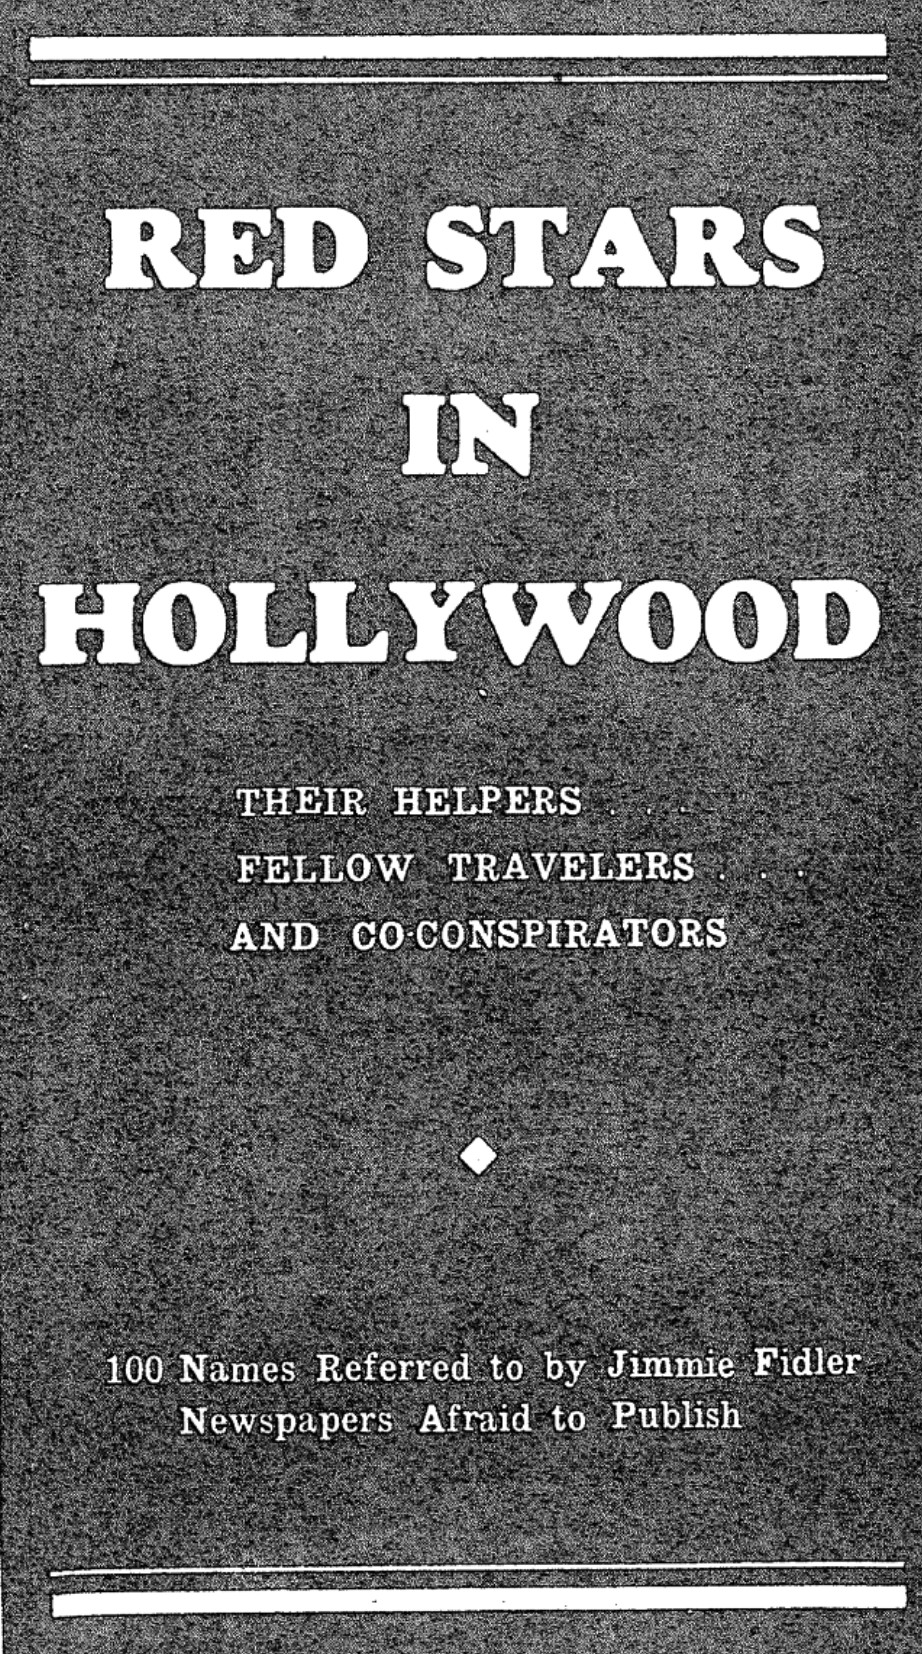 Red Stars in Hollywood (1949) by Myron Fagan